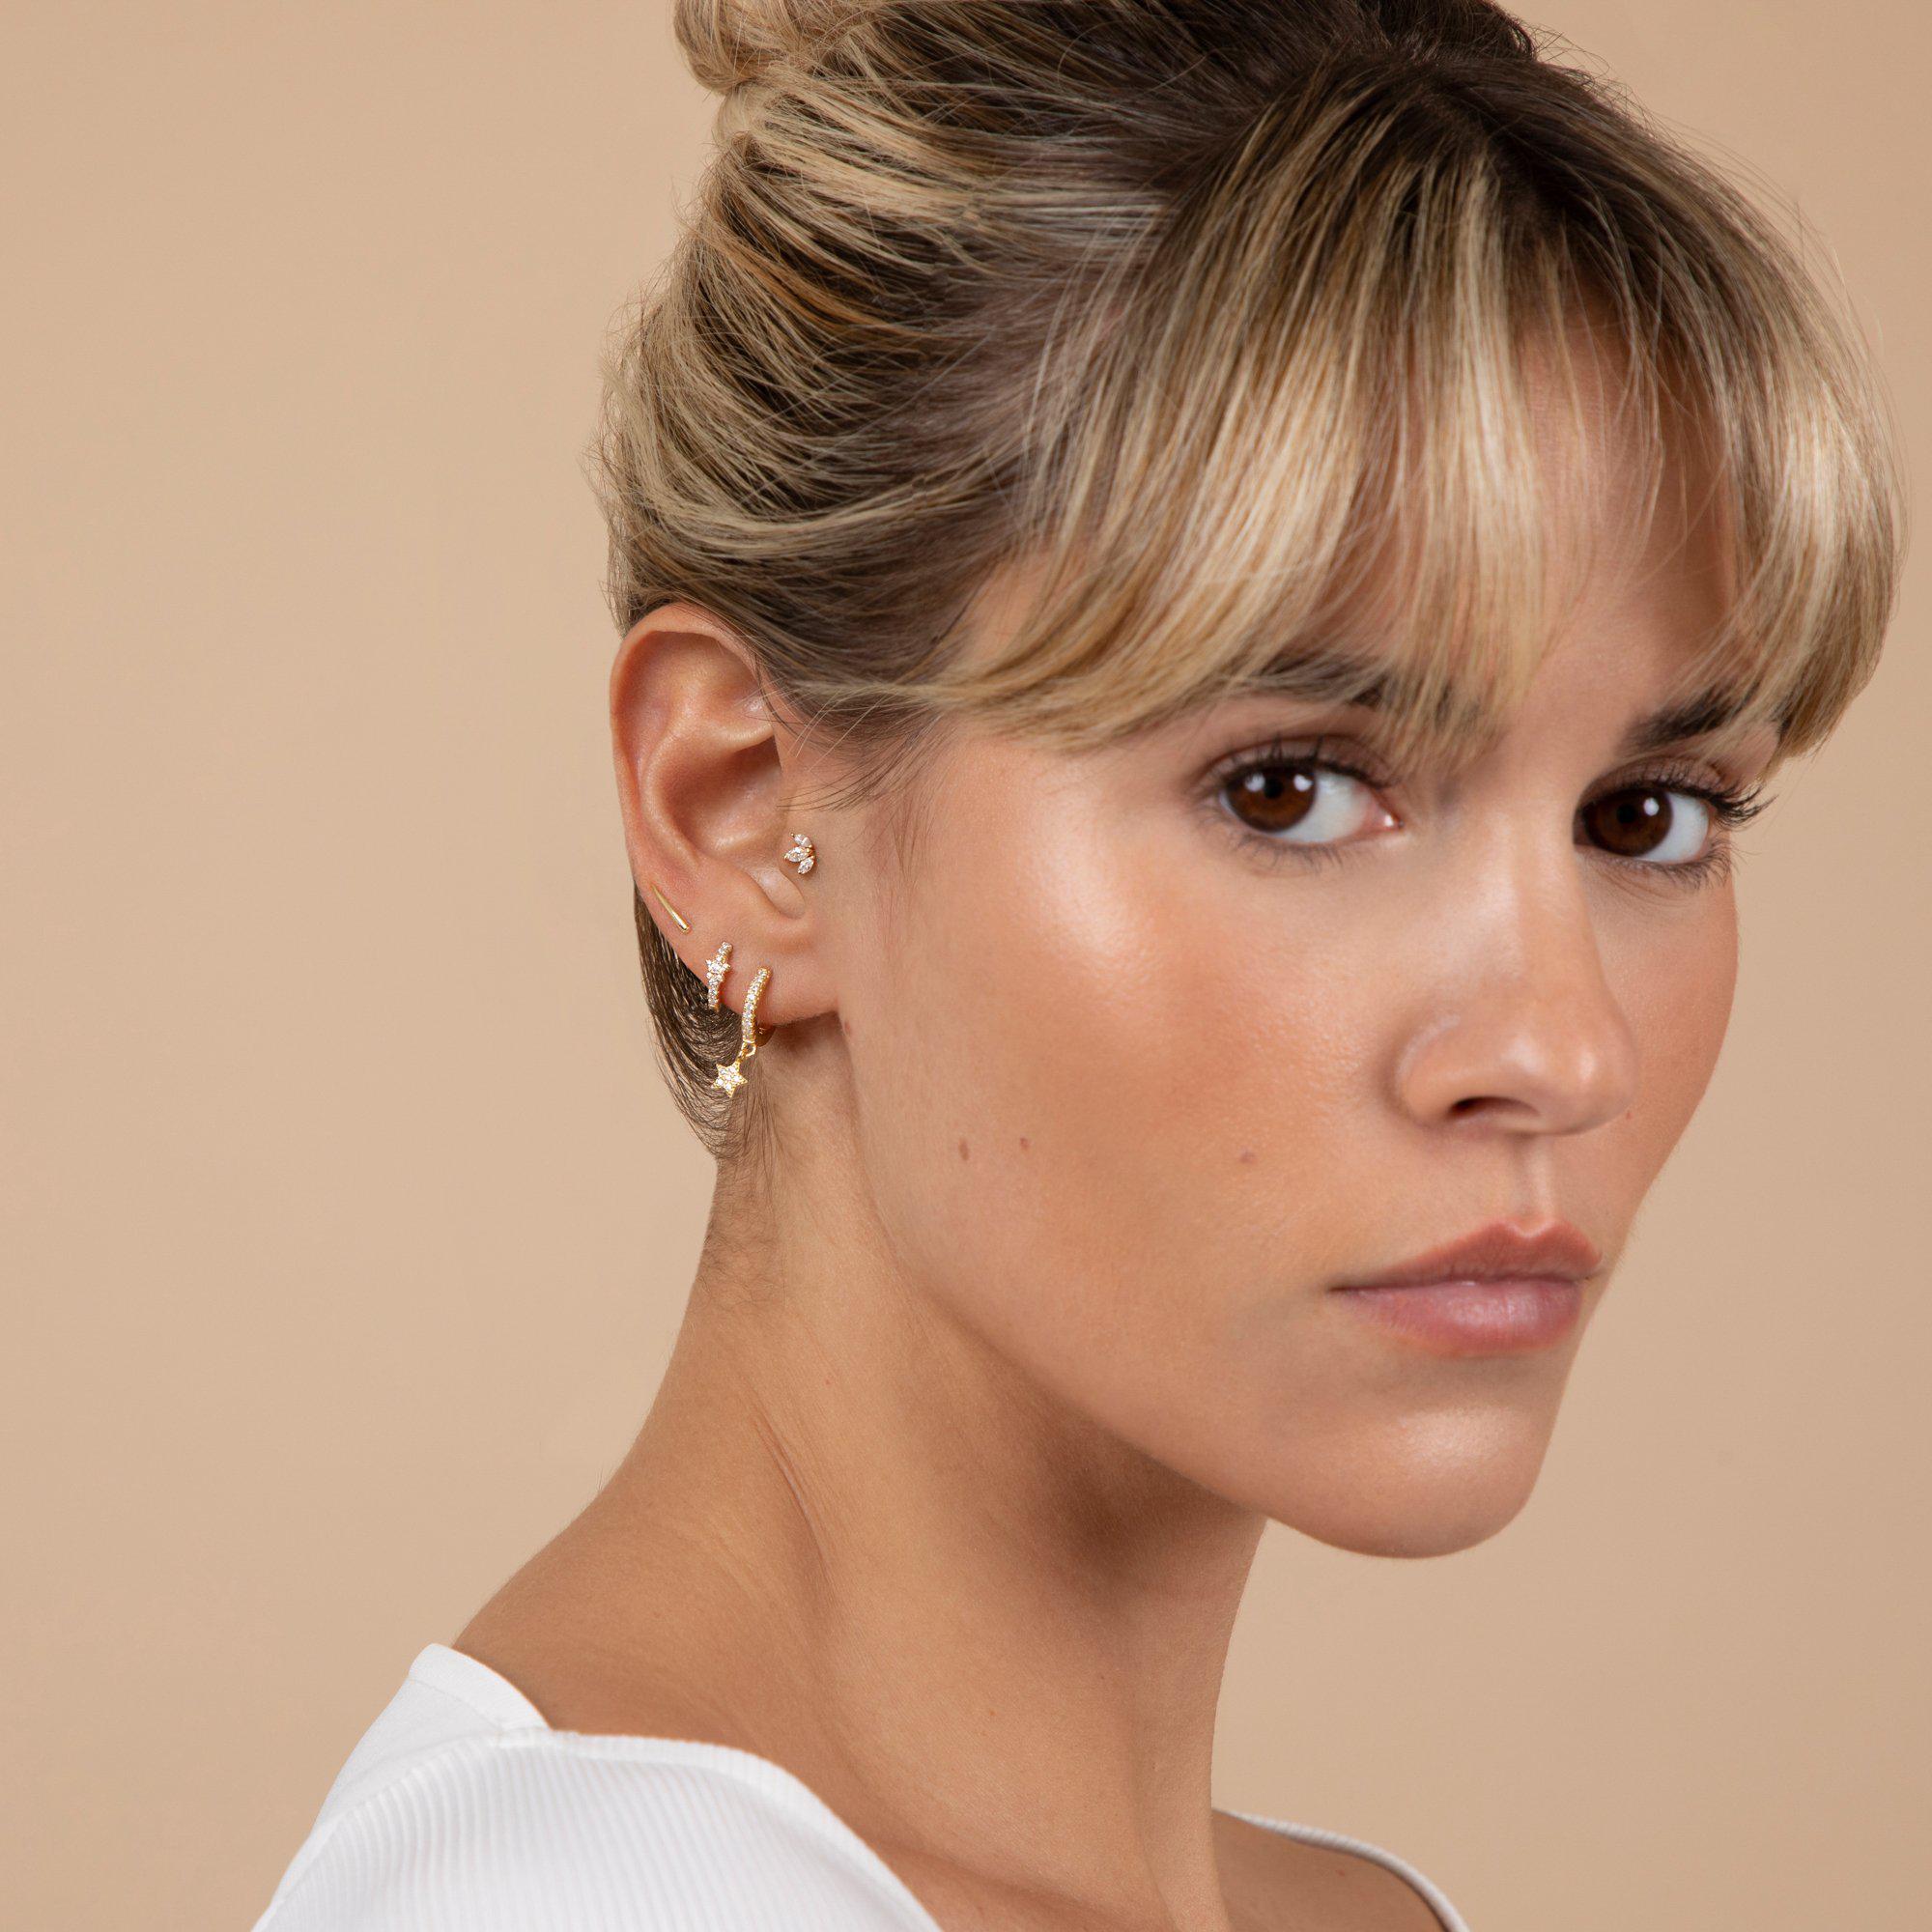 Alba 14k solid yellow gold internally threaded marquise cut crystal single labret stud - Helix & Conch